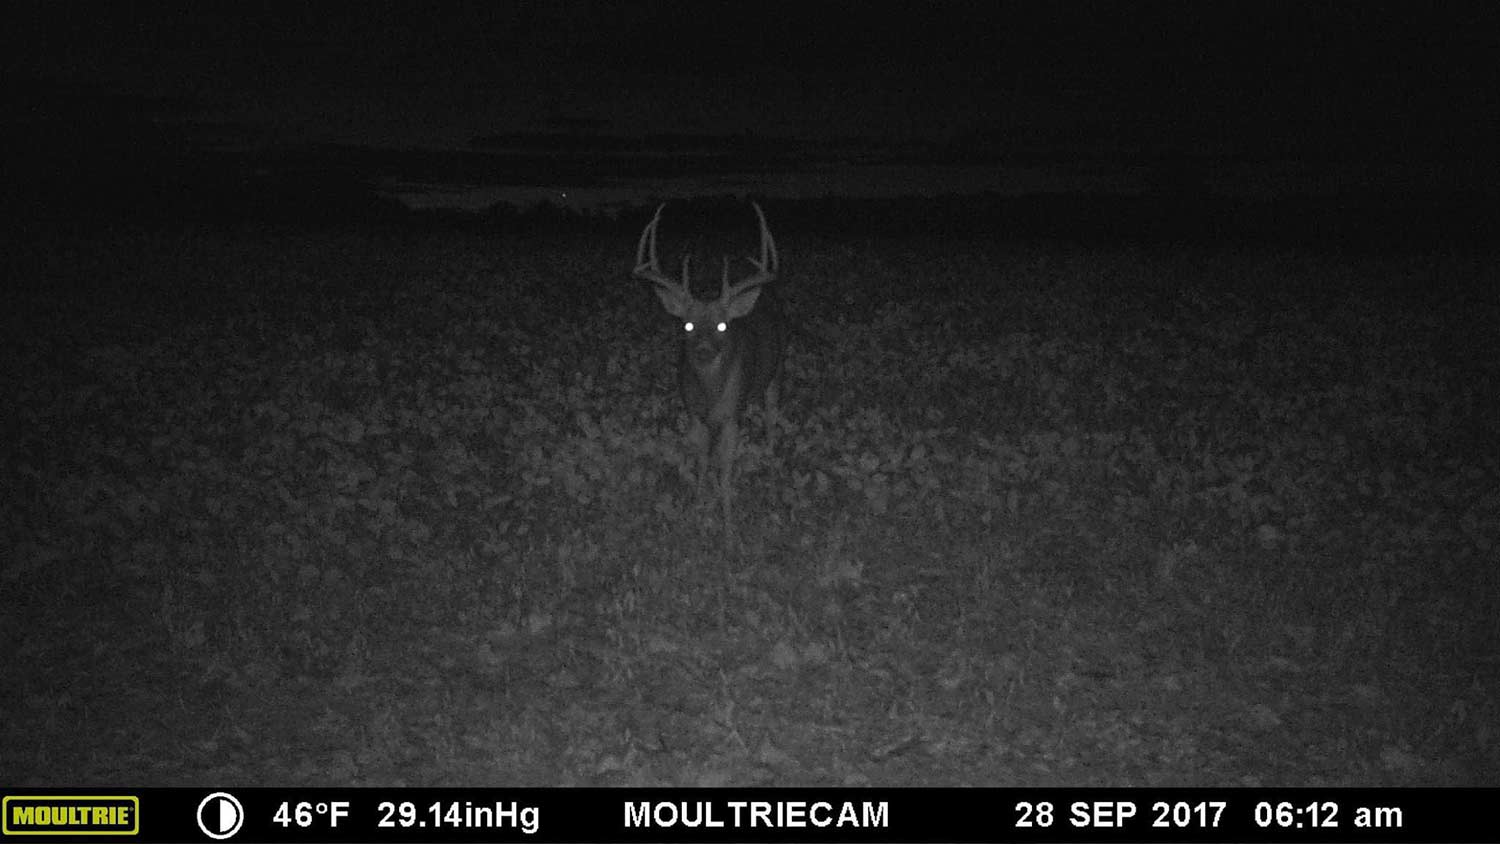 A trail cam photo of a deer at night.